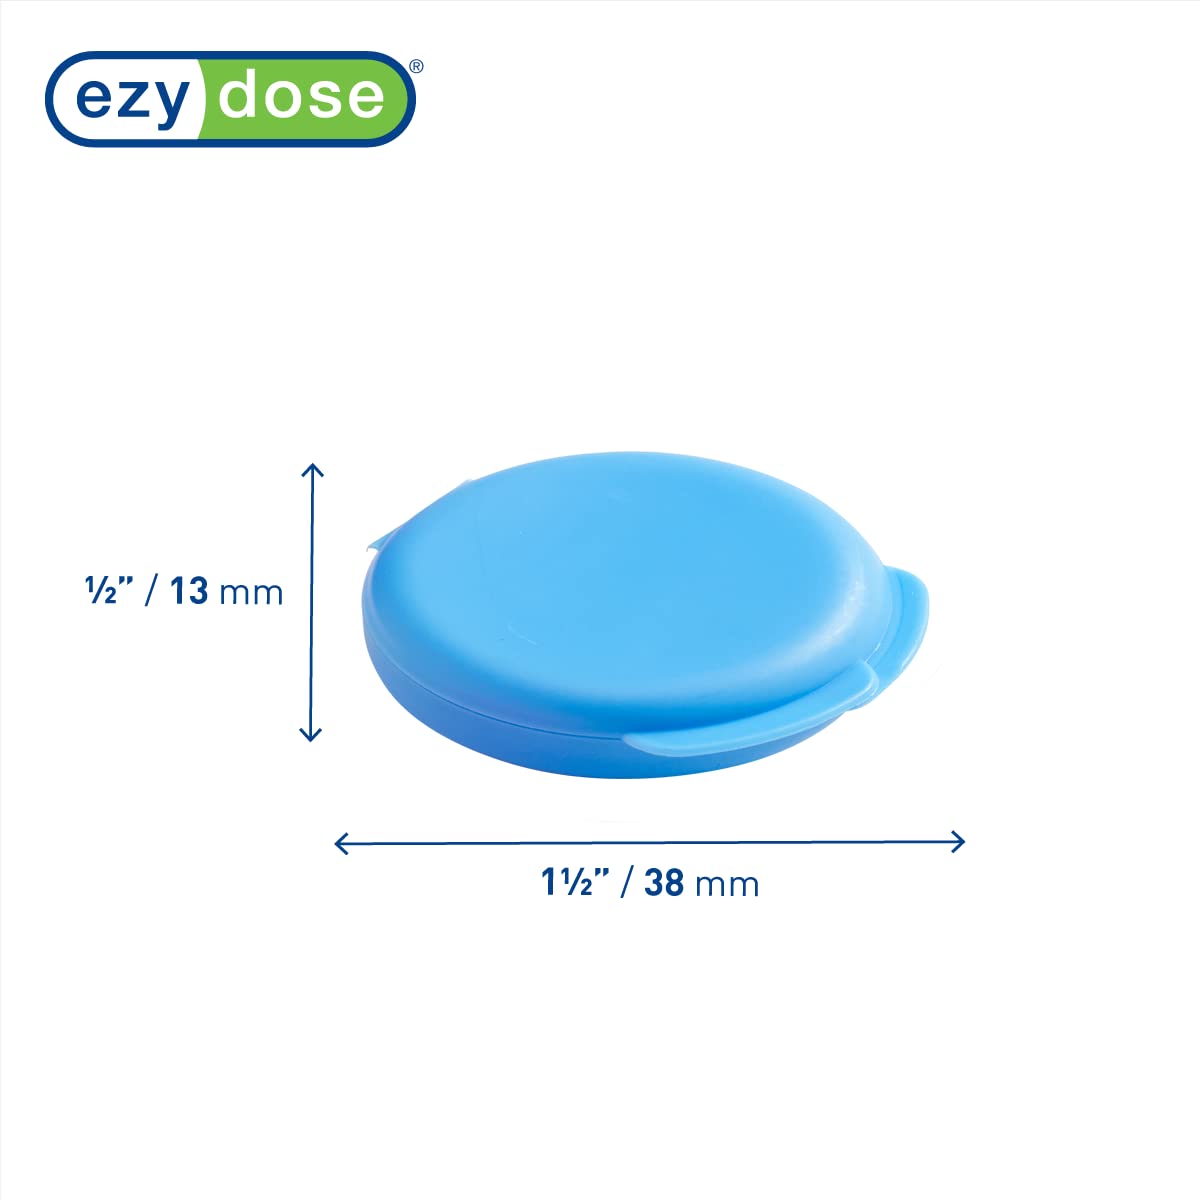 EZY DOSE Daily Round, Portable On-The-Go, Pill Box, Organizer and Vitamin Containers, Snap Shut Lids, Perfect for Traveling, Blue and Green, 2 Pack